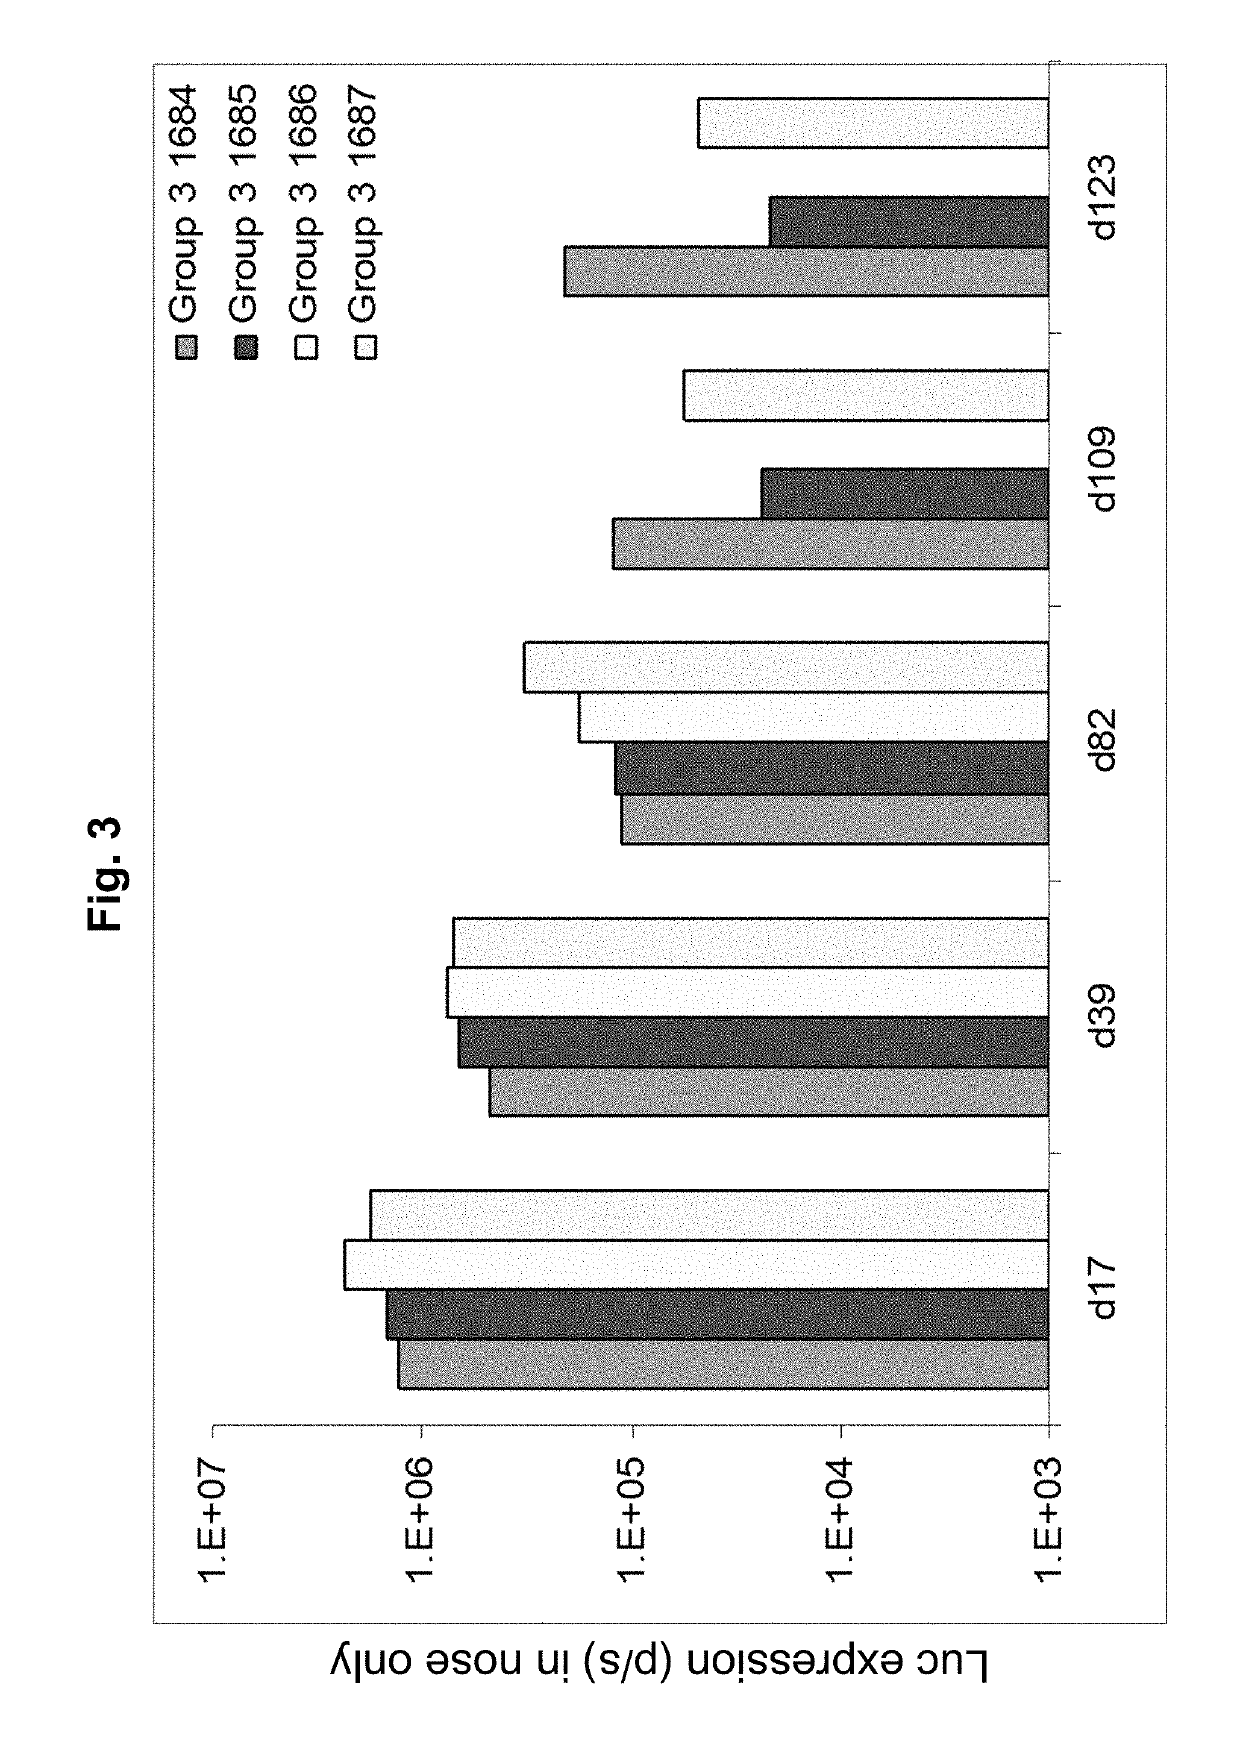 Regimens and Compositions for AAV-Mediated Passive Immunization of Airborne Pathogens